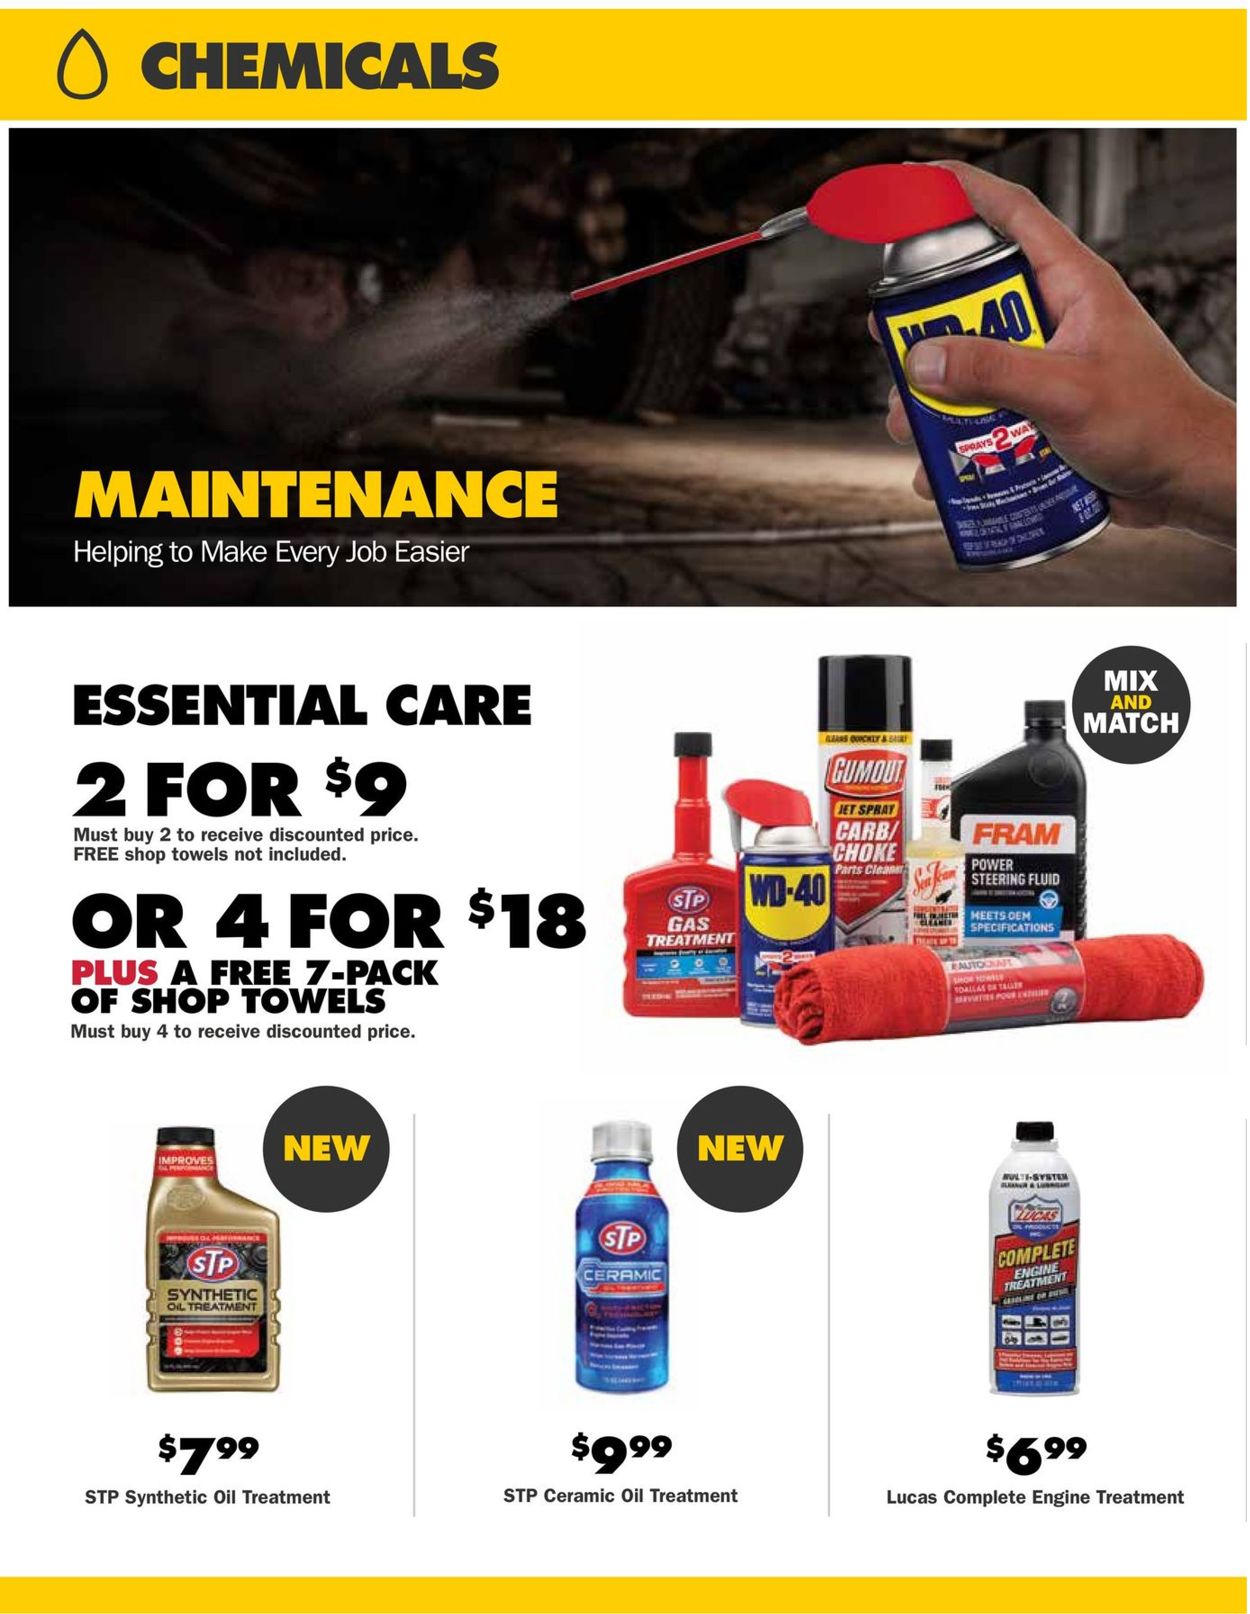 Advance Auto Parts Ad from 10/28/2021